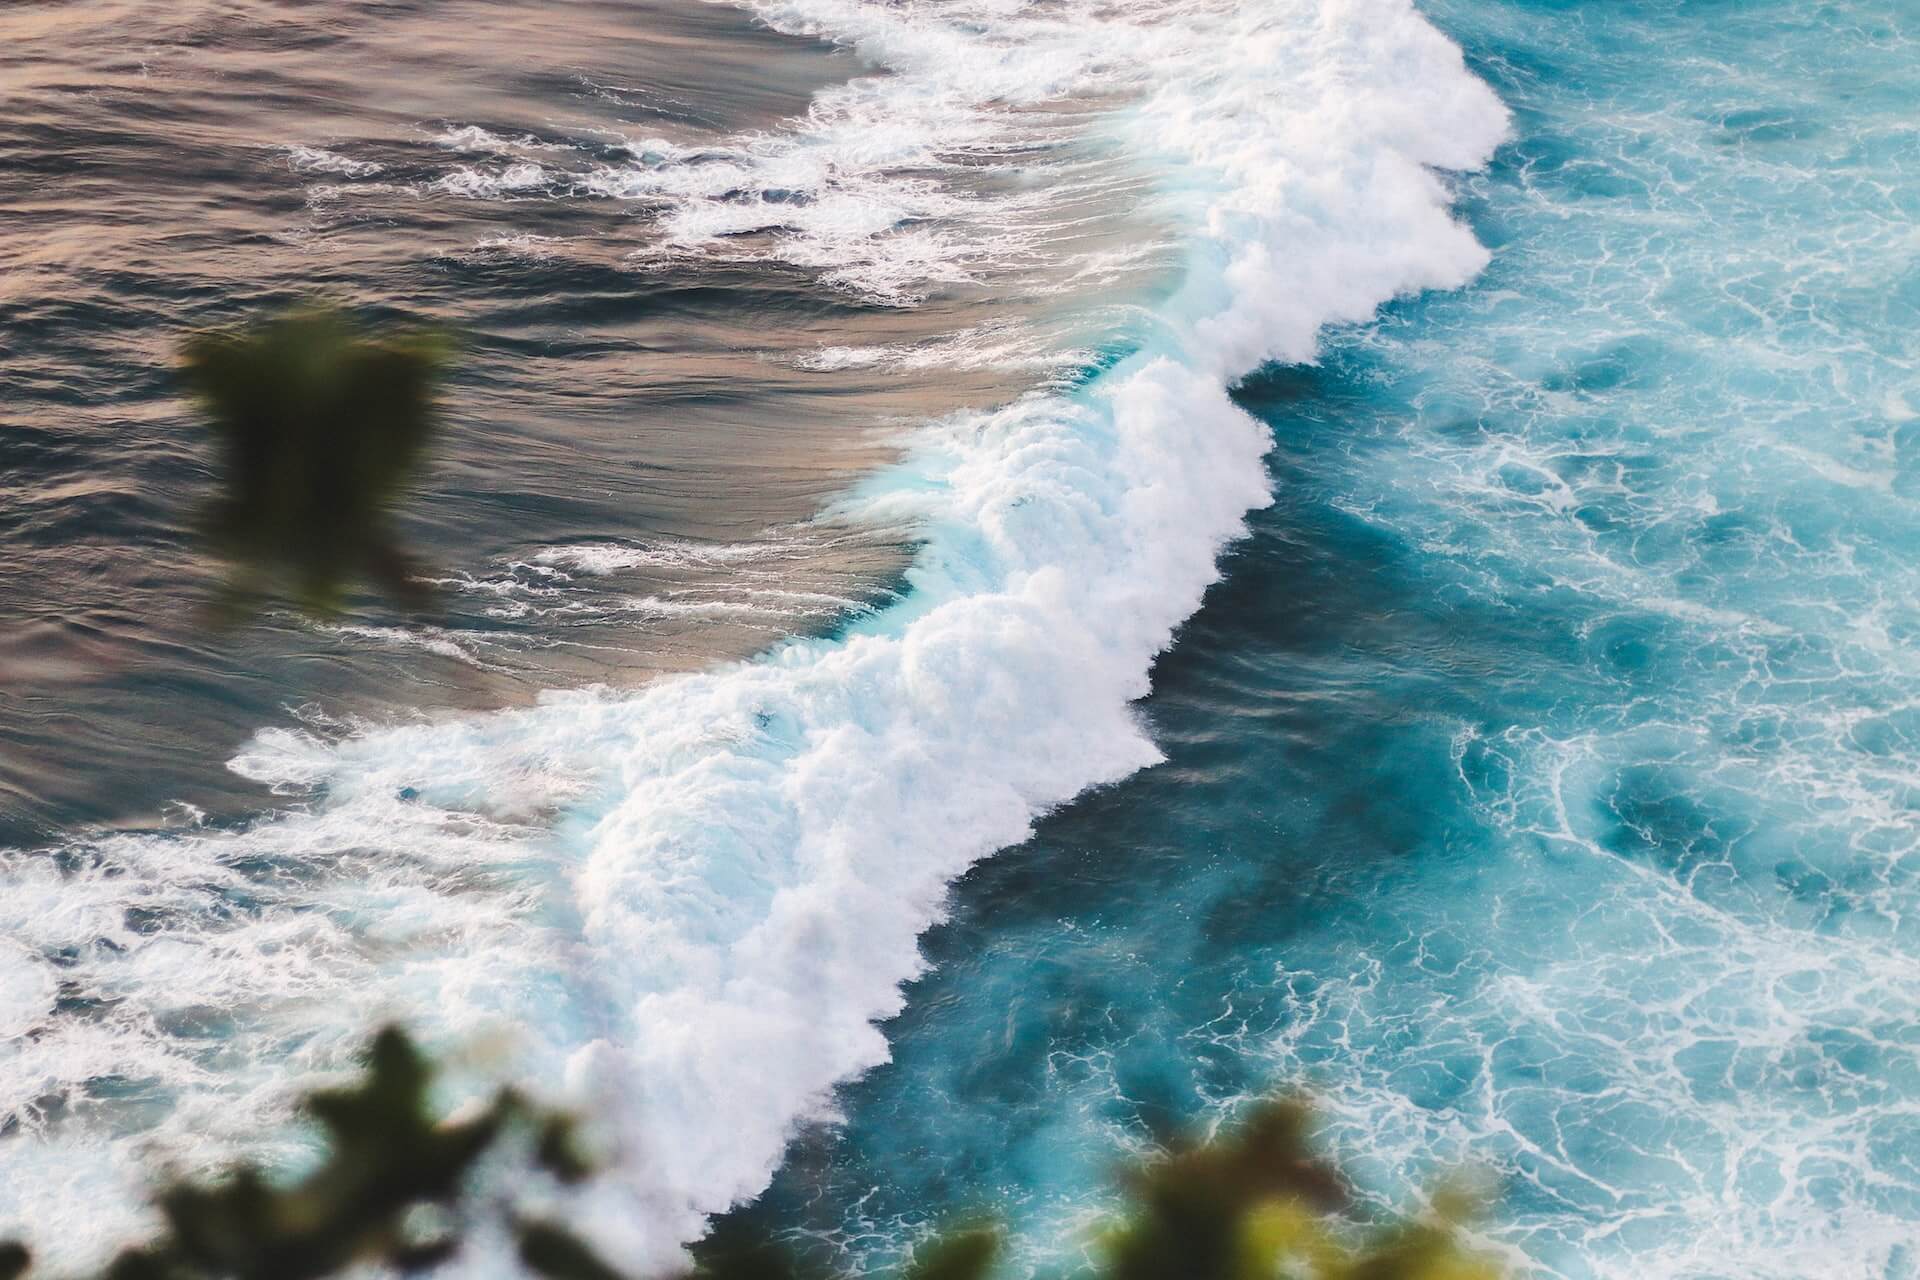 ocean waves and turquoise water in Bali